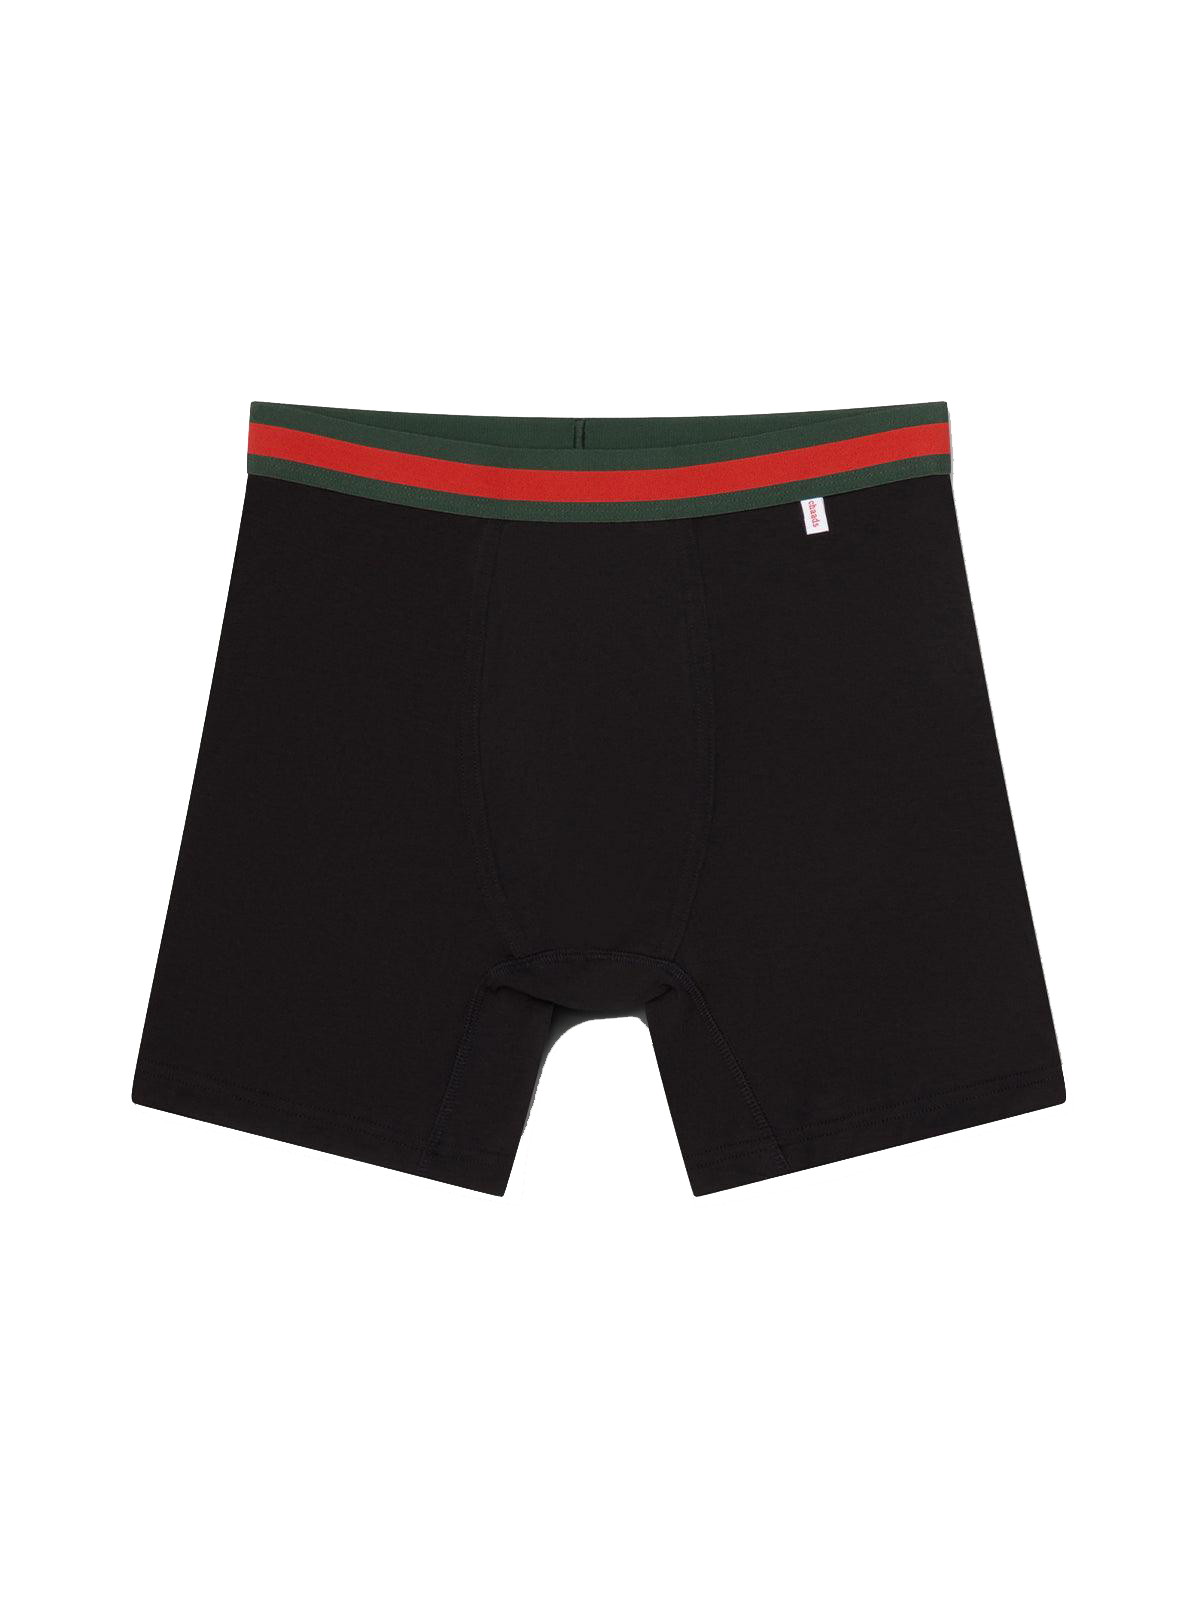 Mens Classic Underwear at Rs 240/piece